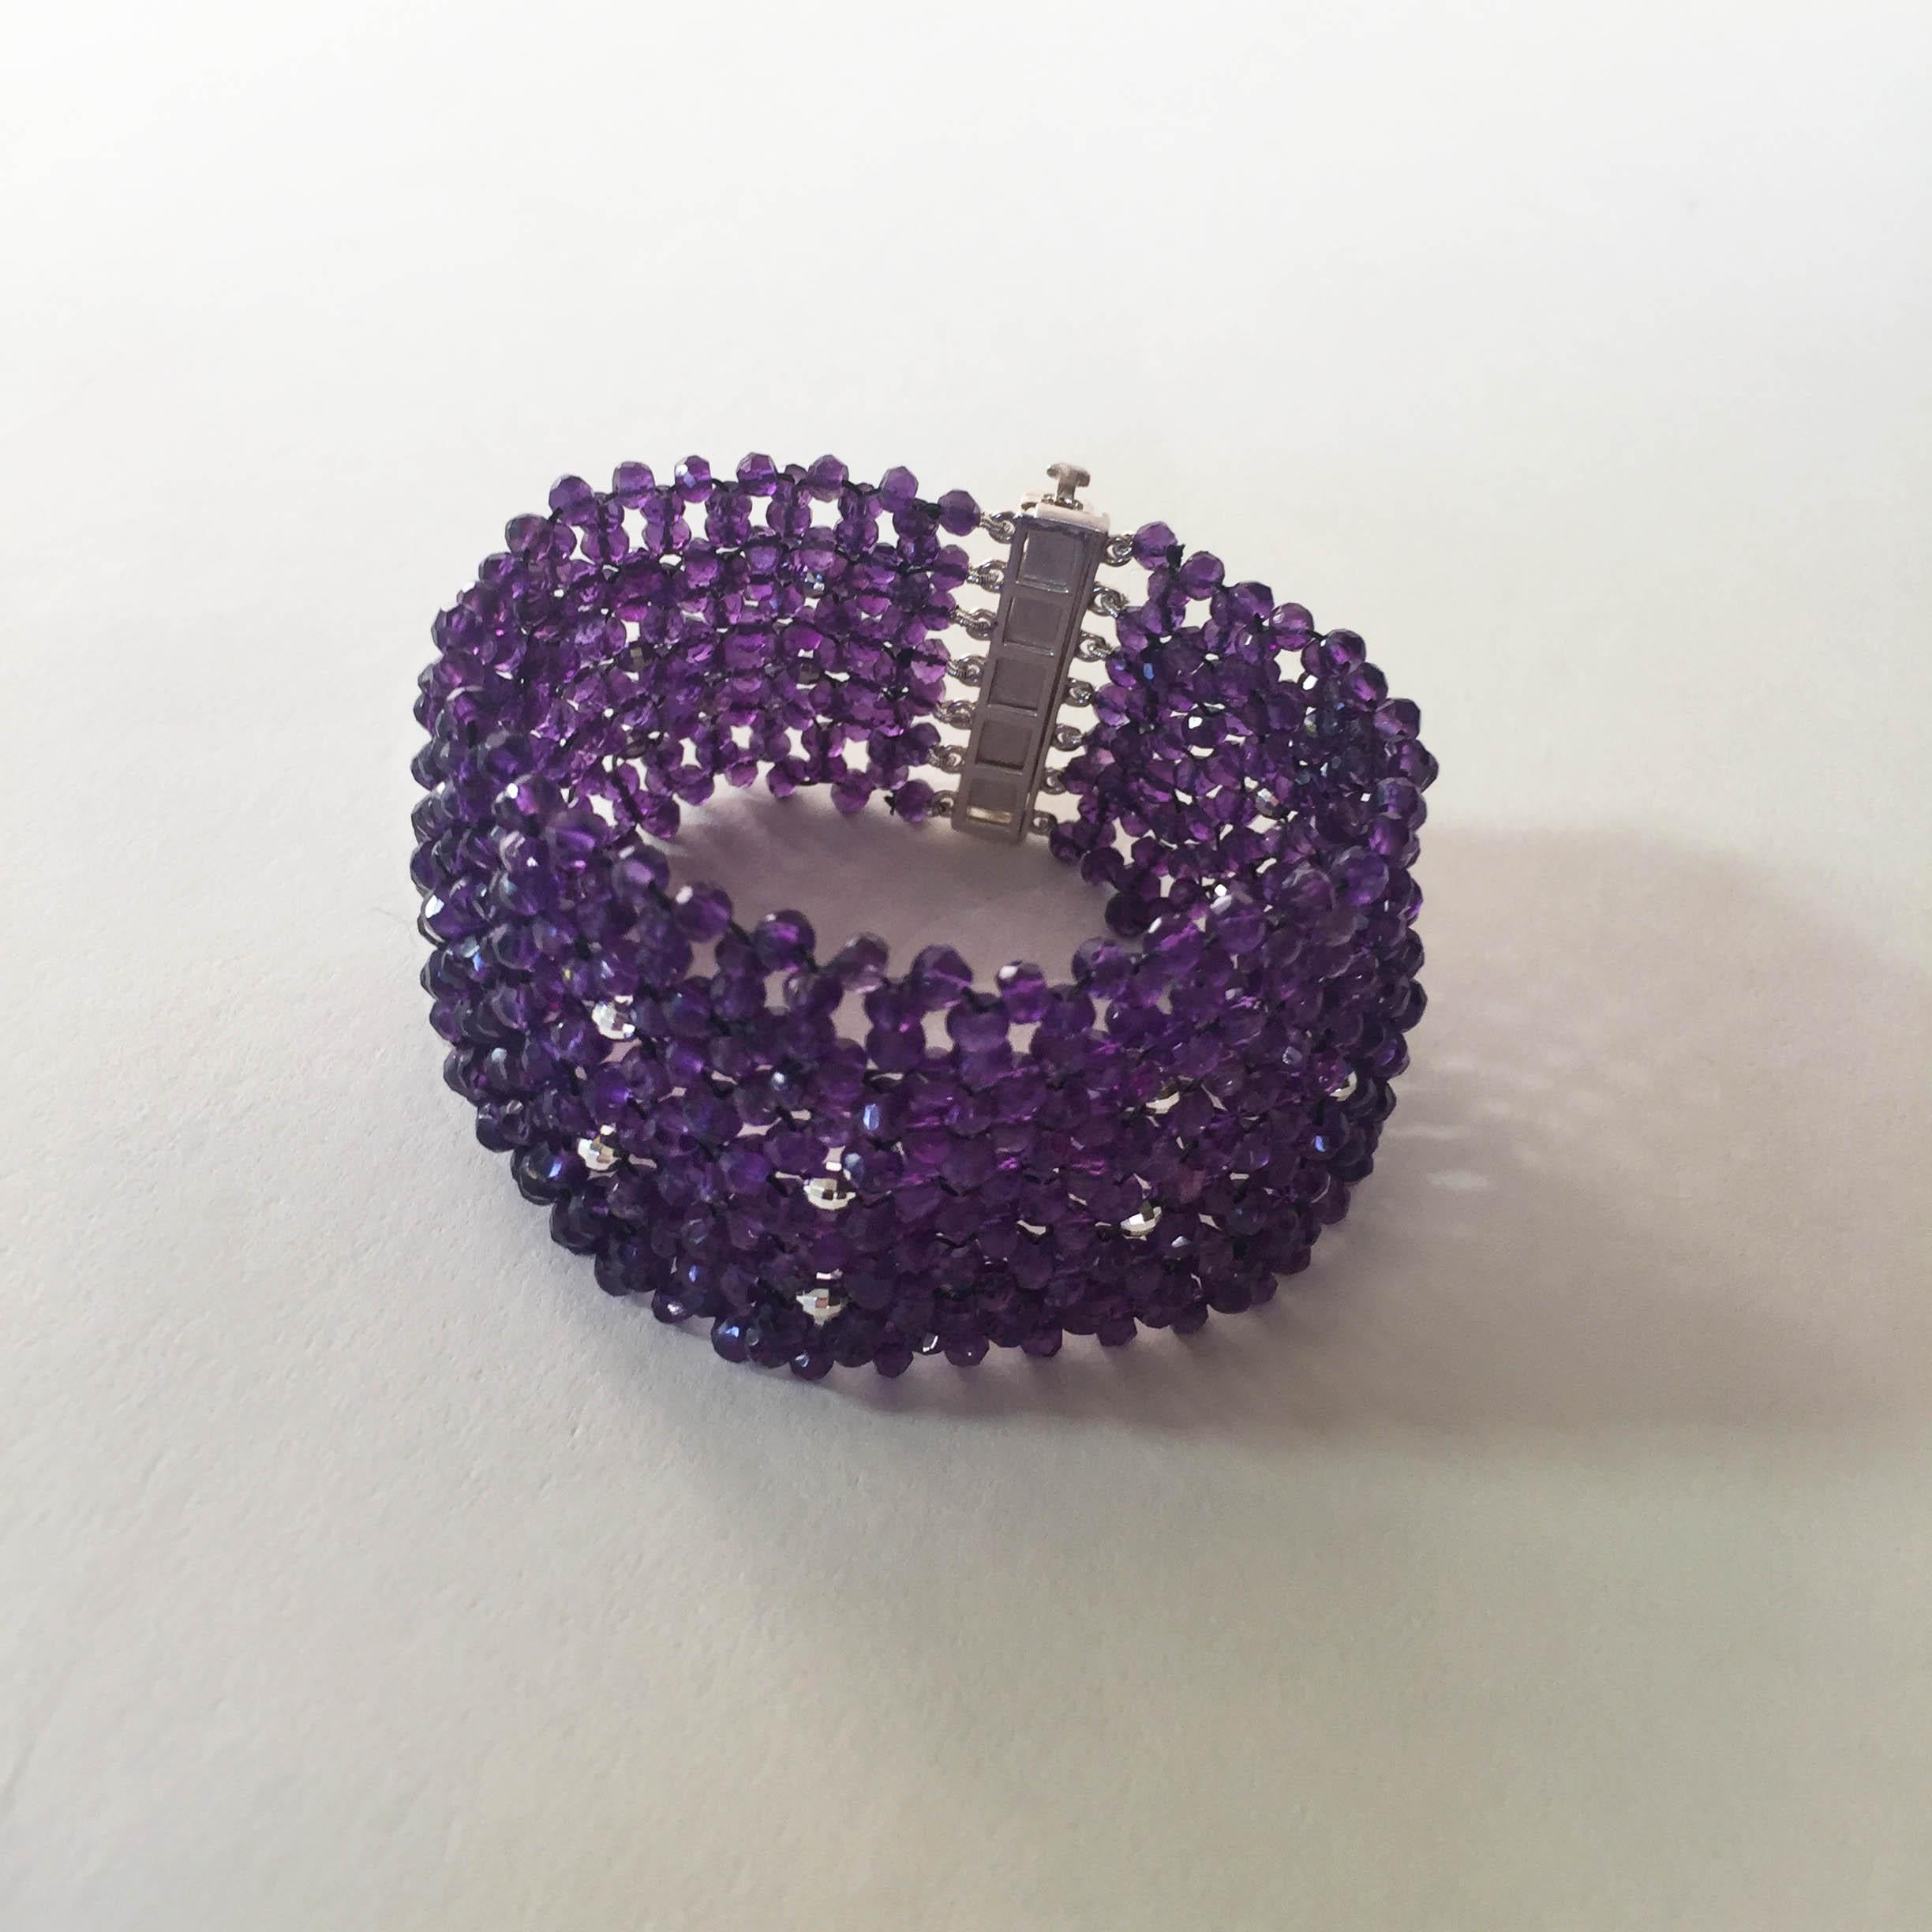 Woven Faceted Amethyst Cuff Bracelet with Sterling Silver Clasp and Beads 2